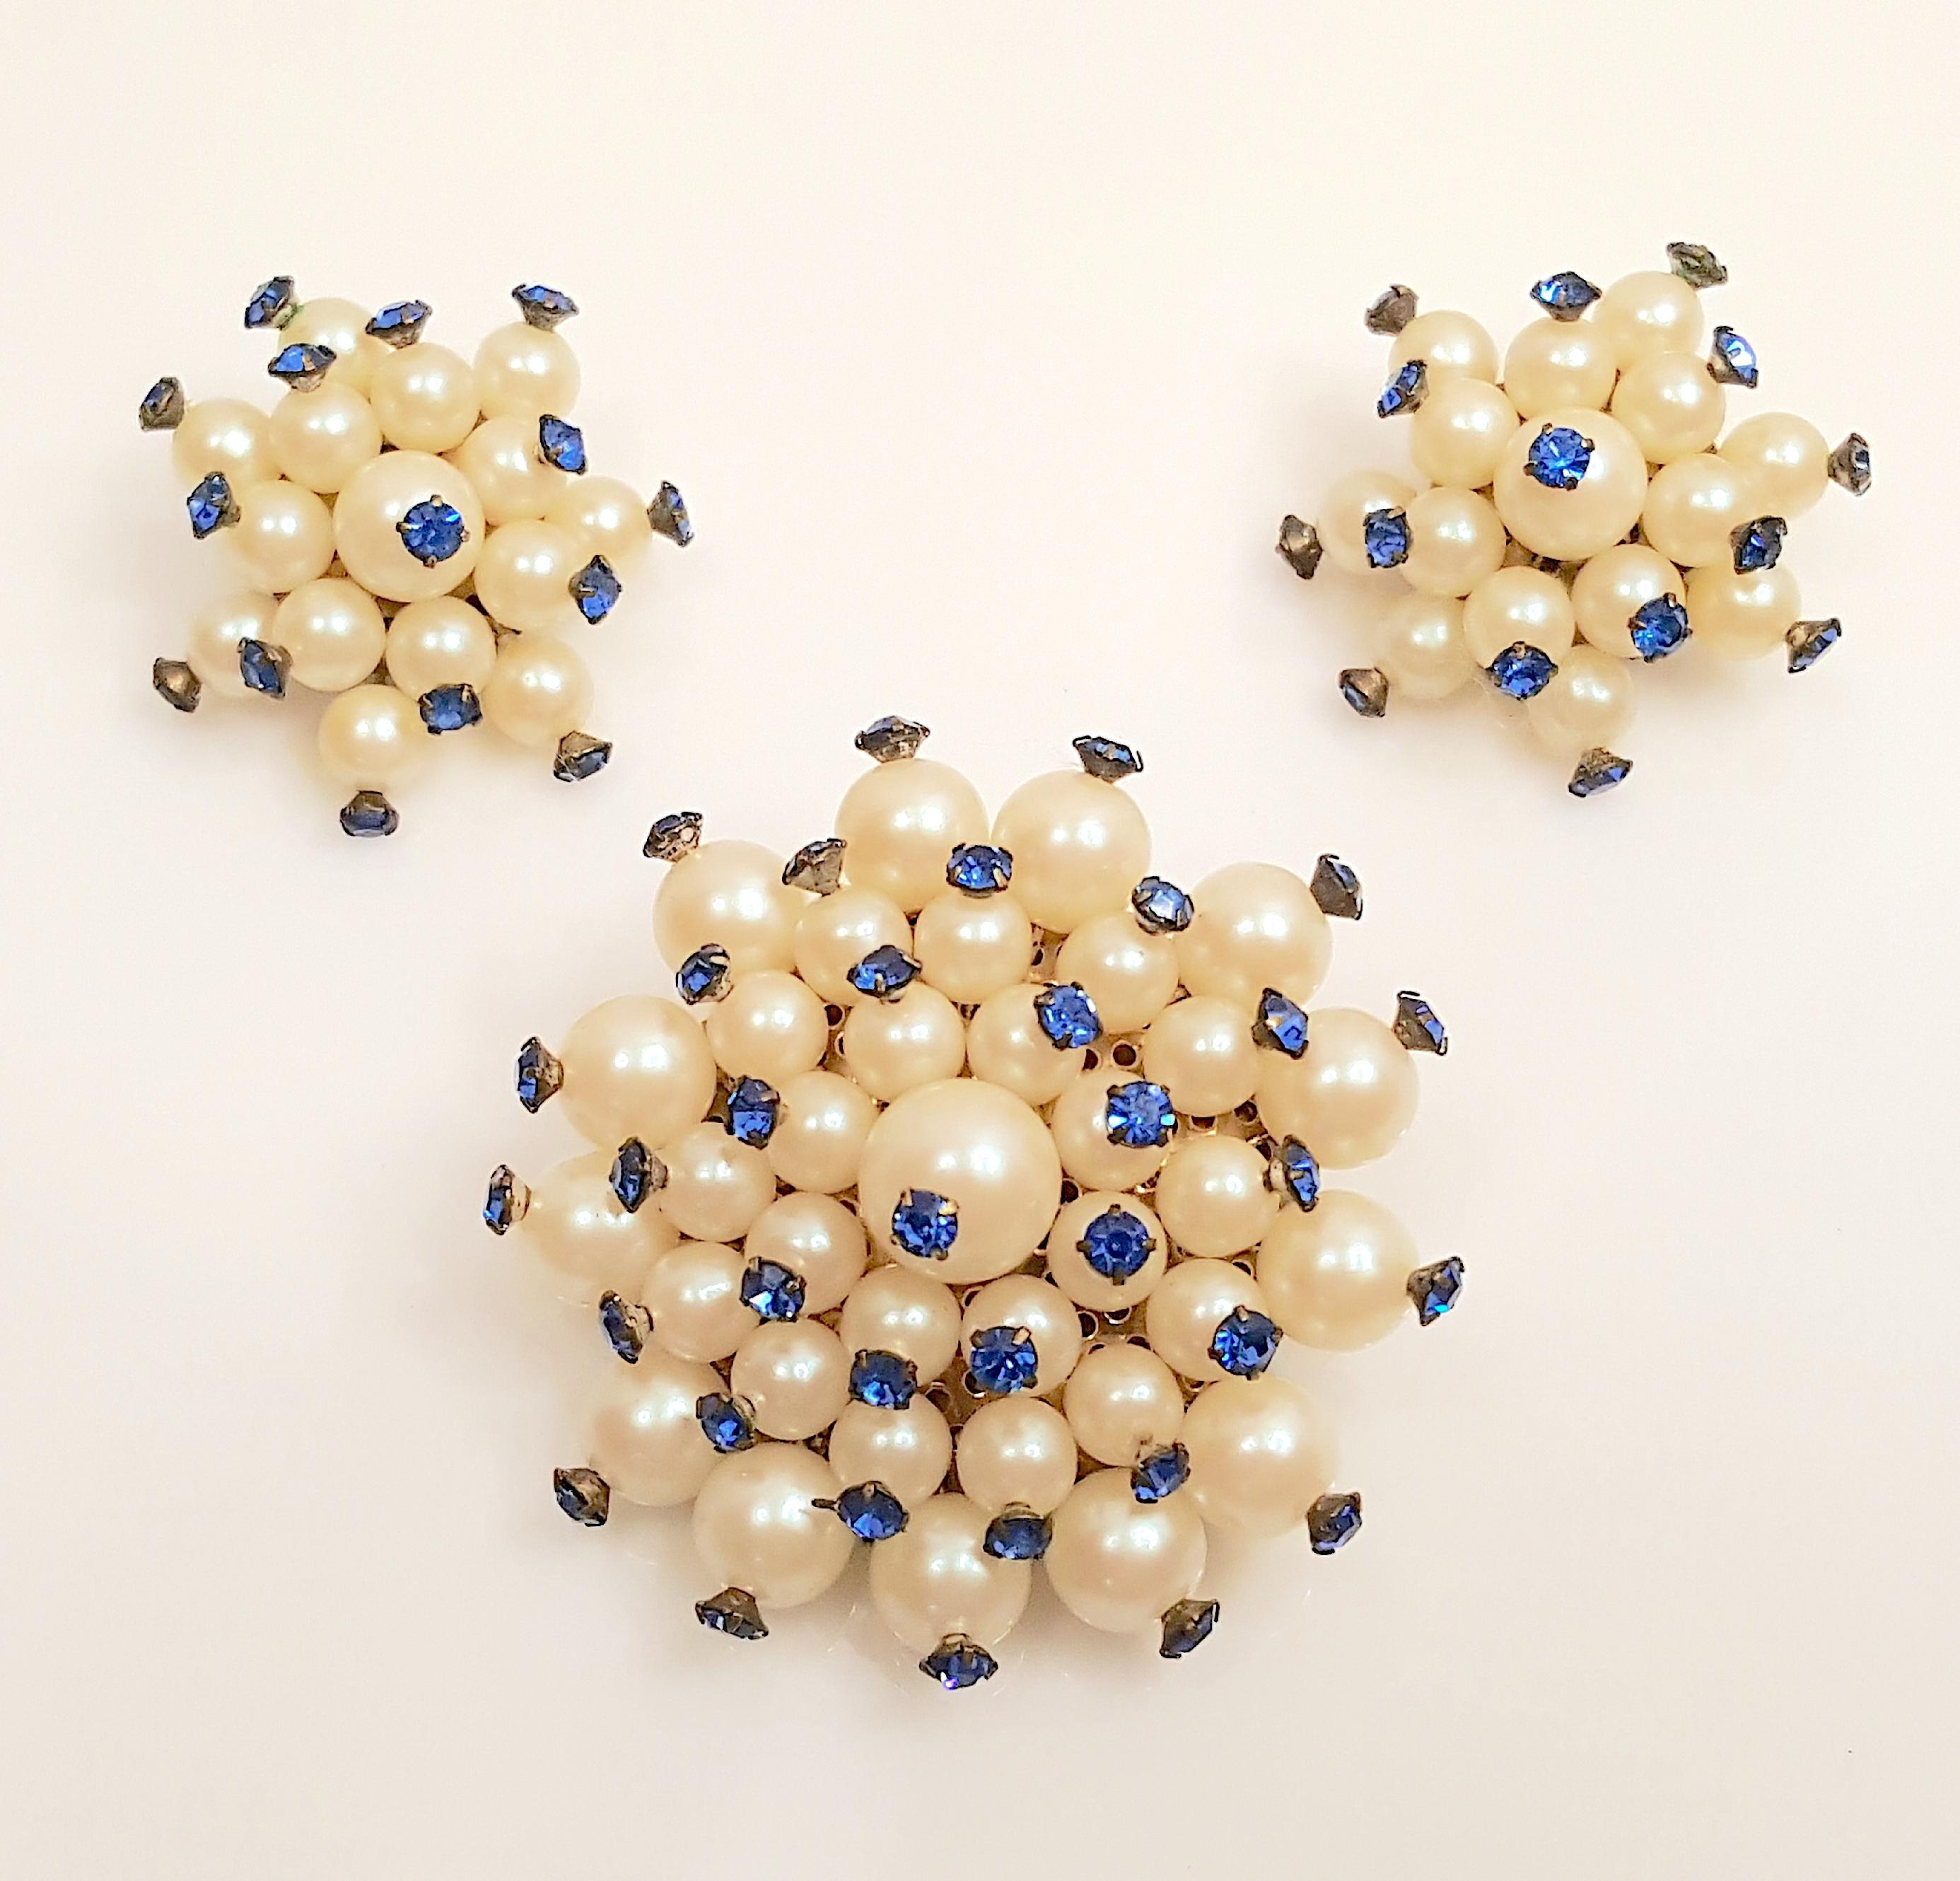 This surrealistic handcrafted faux-sapphire-topped-pearl cluster brooch and clip-earrings set dates to around WWII, when fashion designer Elsa Schiaparelli (1890-1973) embraced the art-movement Surrealism and relocated from Paris to New York while